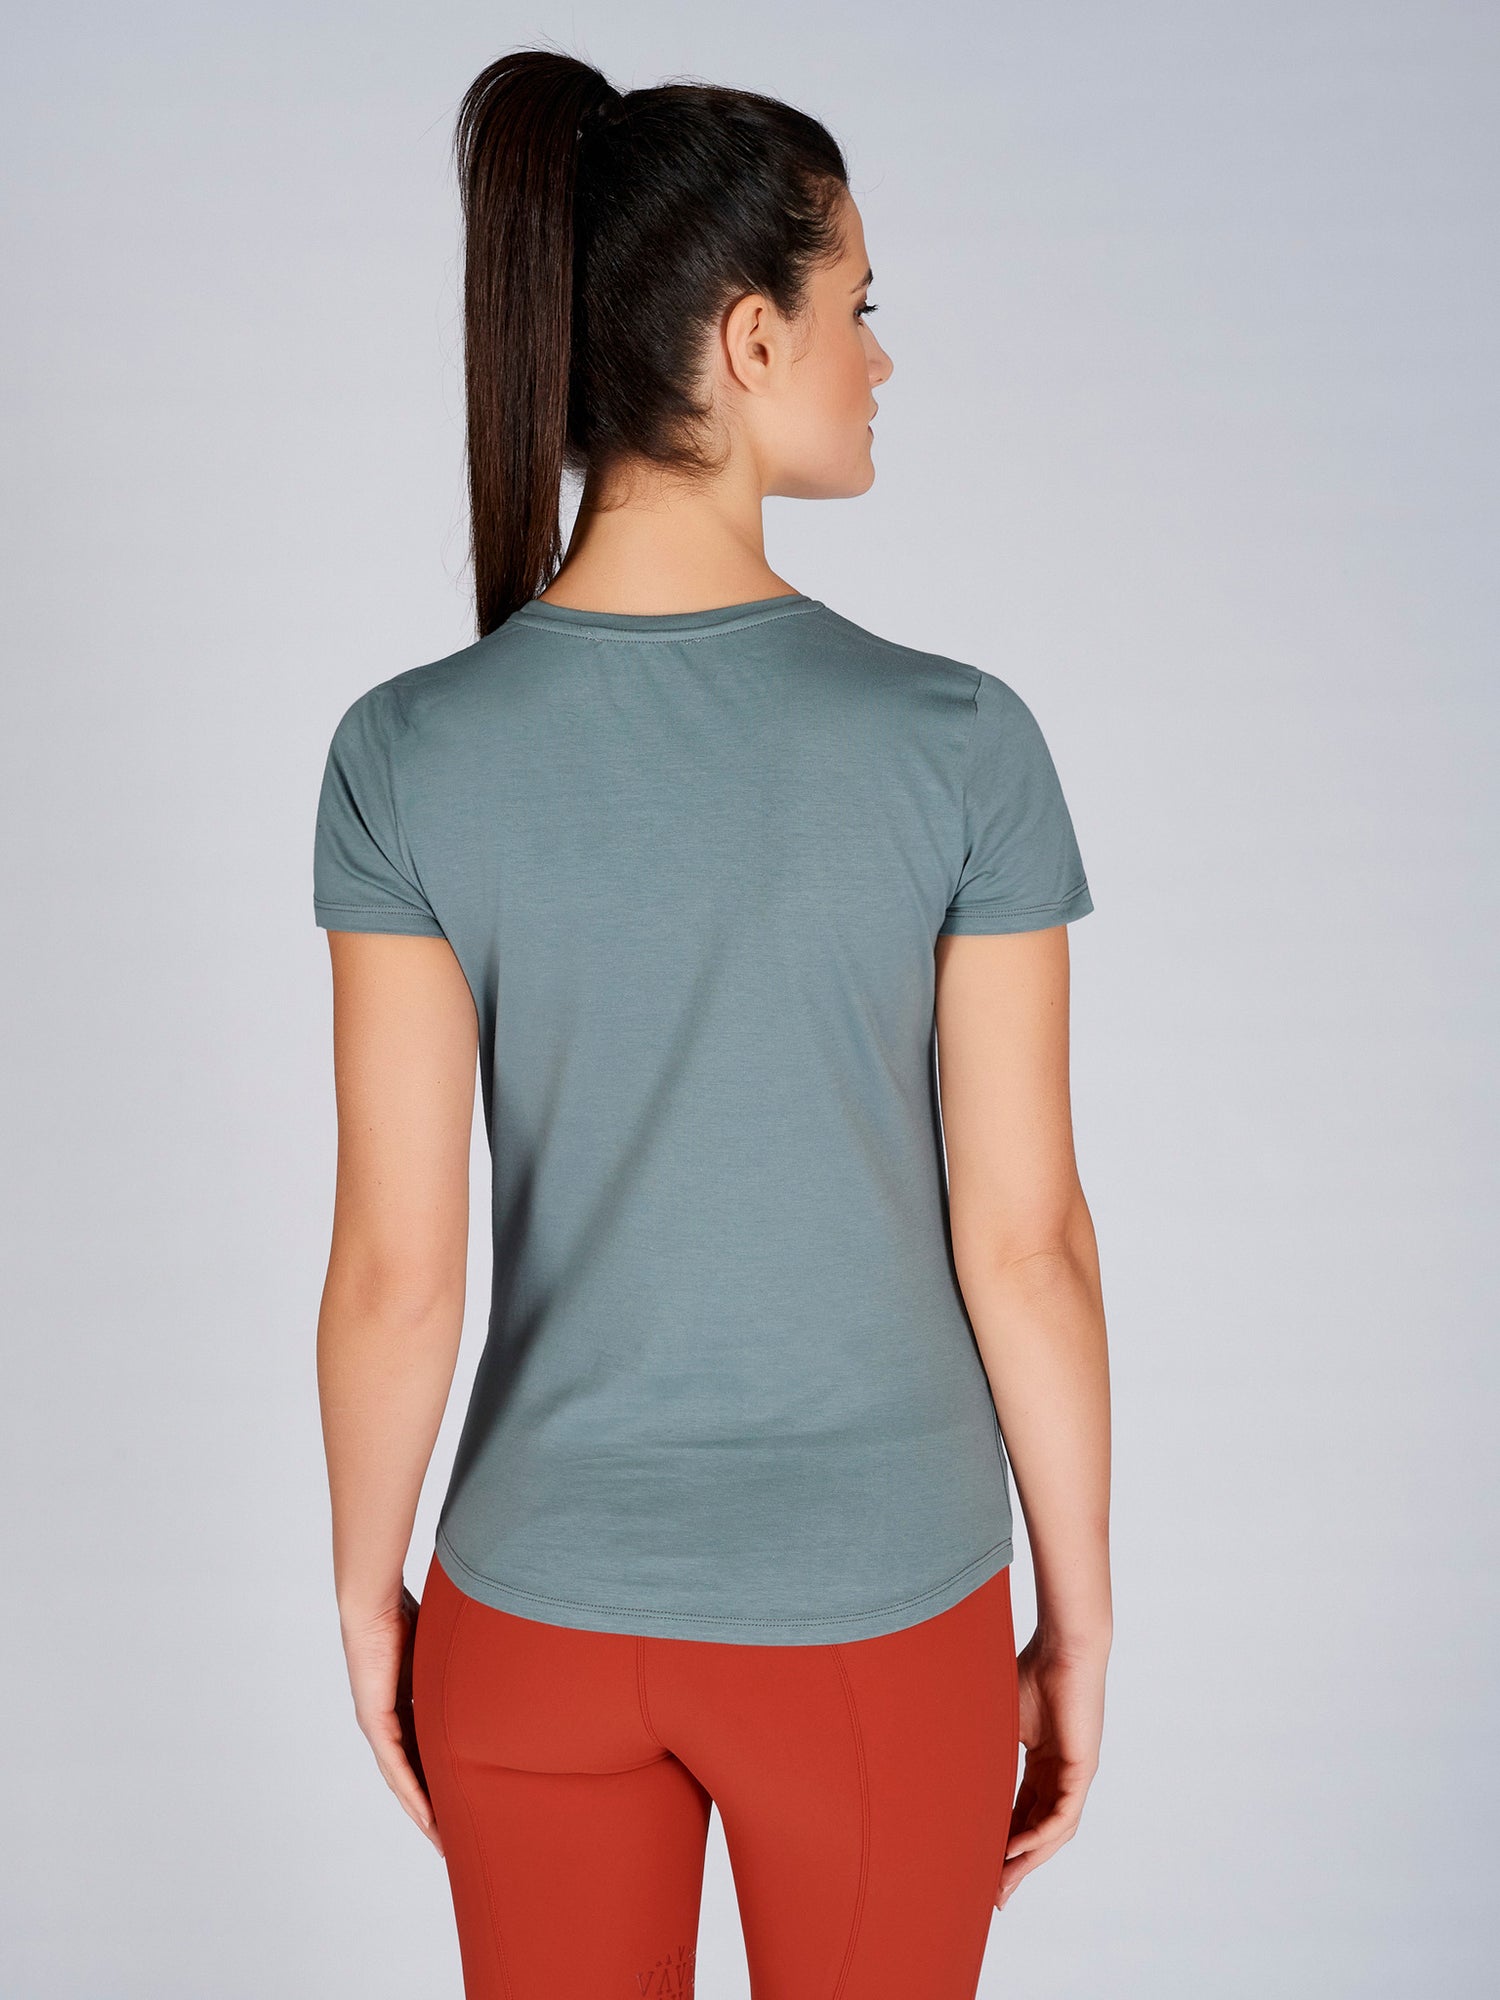 The Vestrum Monterosso Sage S/S T Shirt is perfect for the update for your casual and training wardrobe. Made from a soft bi stretch cotton elastane jersey for maximum comfort. Featuring the Vestrum graphic logo across the front.  coordinate with the Syracuse sage green breeches to complete the look. 